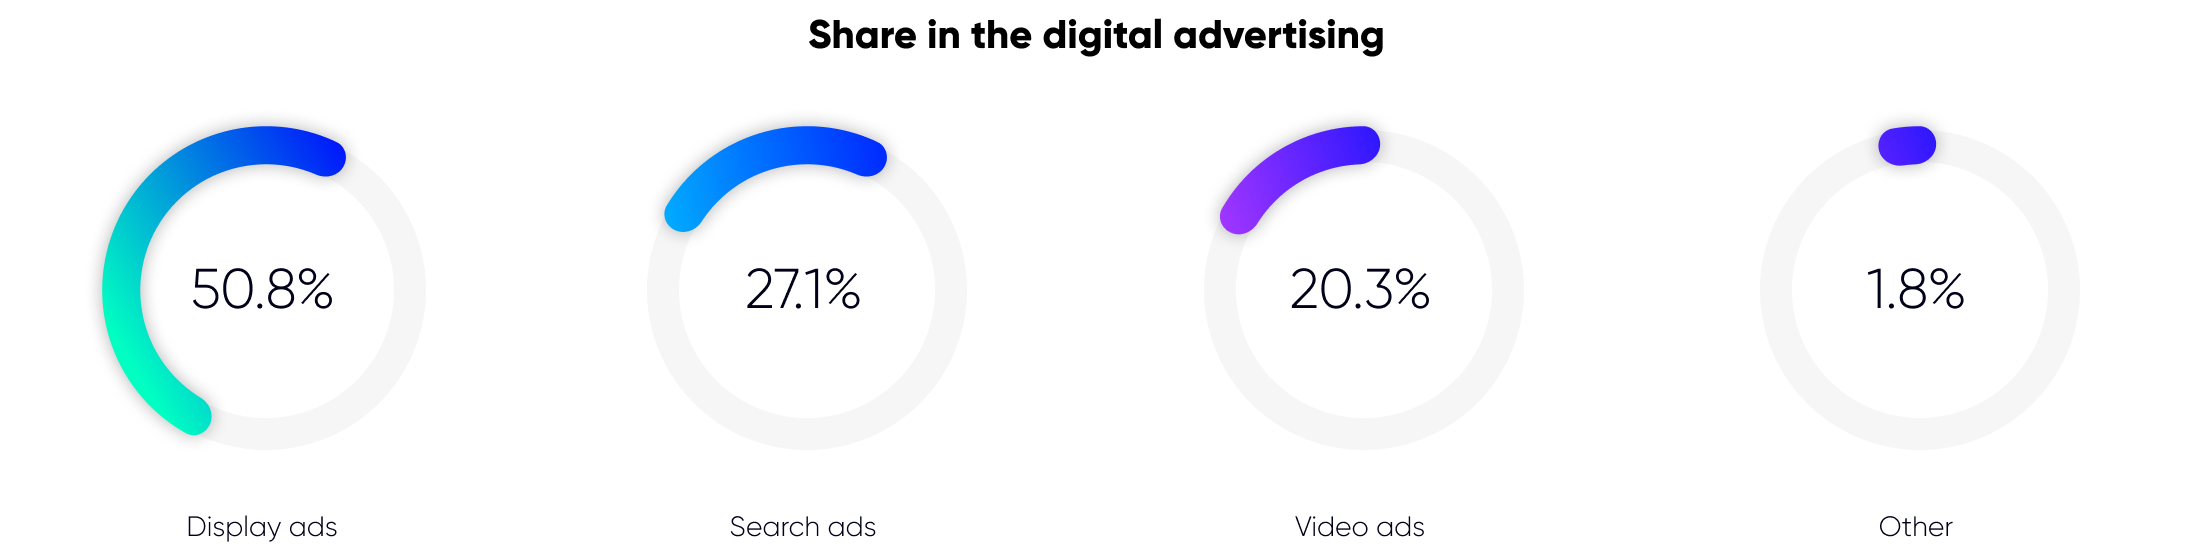 share in digital advertising in poland